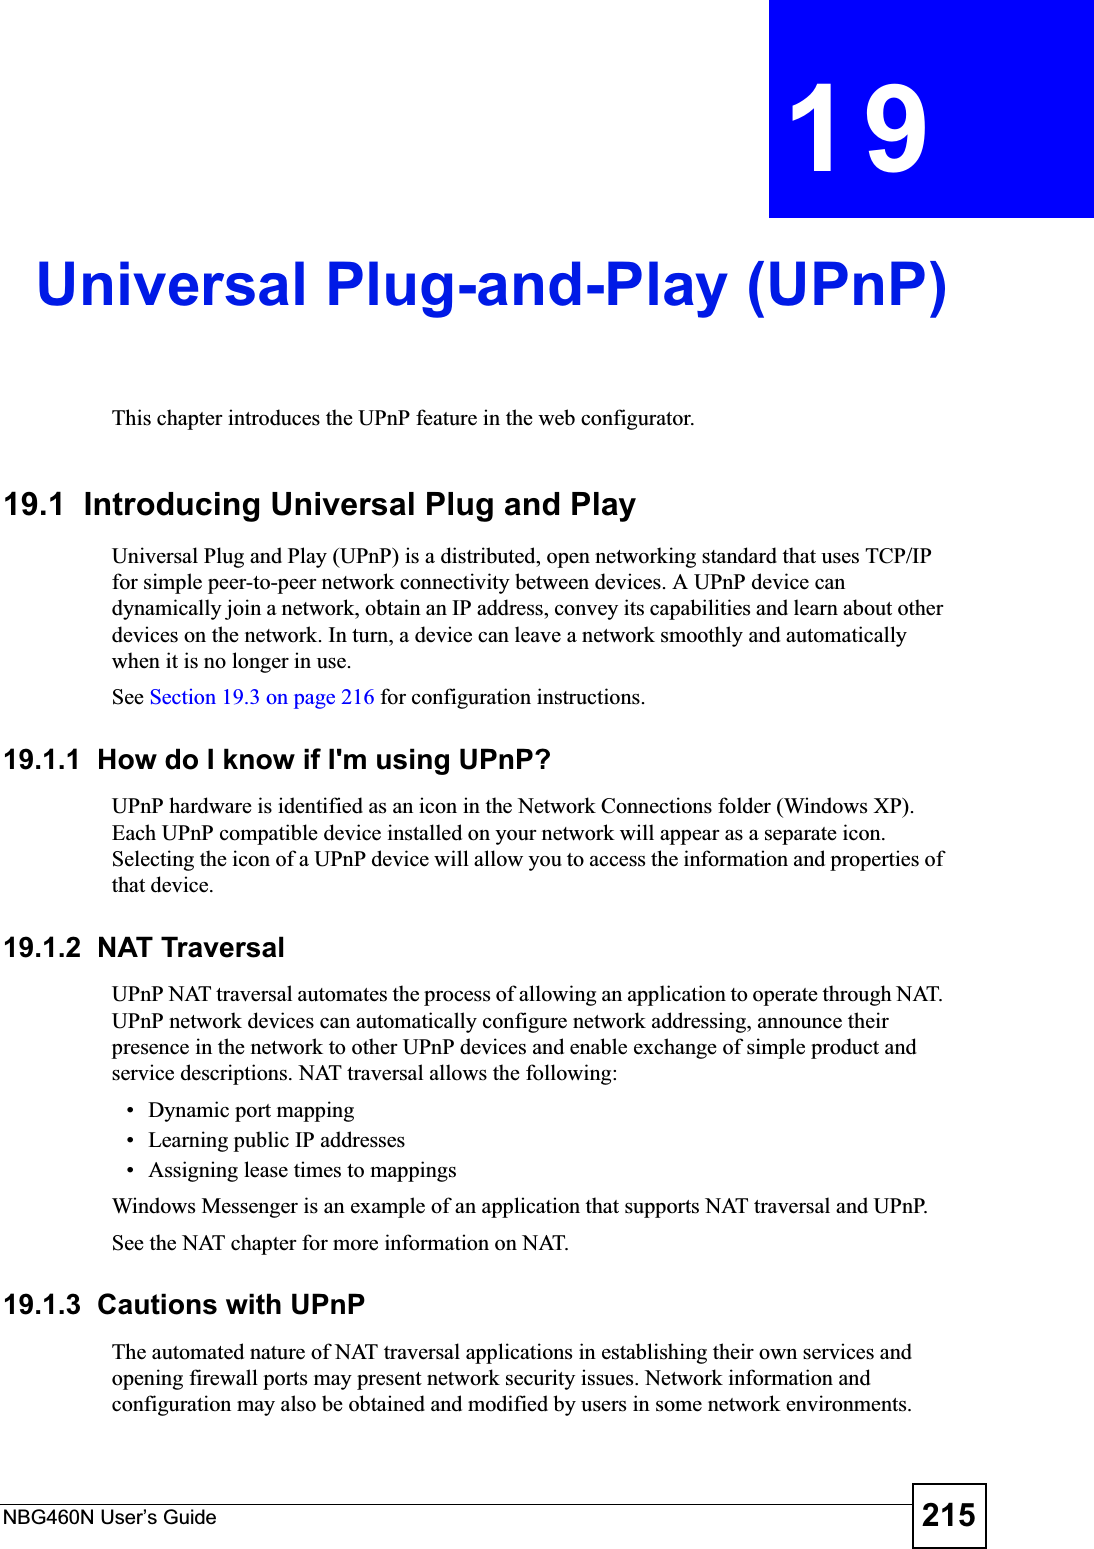 NBG460N User’s Guide 215CHAPTER 19Universal Plug-and-Play (UPnP)This chapter introduces the UPnP feature in the web configurator.19.1  Introducing Universal Plug and Play Universal Plug and Play (UPnP) is a distributed, open networking standard that uses TCP/IP for simple peer-to-peer network connectivity between devices. A UPnP device can dynamically join a network, obtain an IP address, convey its capabilities and learn about other devices on the network. In turn, a device can leave a network smoothly and automatically when it is no longer in use.See Section 19.3 on page 216 for configuration instructions. 19.1.1  How do I know if I&apos;m using UPnP? UPnP hardware is identified as an icon in the Network Connections folder (Windows XP). Each UPnP compatible device installed on your network will appear as a separate icon. Selecting the icon of a UPnP device will allow you to access the information and properties of that device. 19.1.2  NAT TraversalUPnP NAT traversal automates the process of allowing an application to operate through NAT. UPnP network devices can automatically configure network addressing, announce their presence in the network to other UPnP devices and enable exchange of simple product and service descriptions. NAT traversal allows the following:• Dynamic port mapping• Learning public IP addresses• Assigning lease times to mappingsWindows Messenger is an example of an application that supports NAT traversal and UPnP. See the NAT chapter for more information on NAT.19.1.3  Cautions with UPnPThe automated nature of NAT traversal applications in establishing their own services and opening firewall ports may present network security issues. Network information and configuration may also be obtained and modified by users in some network environments. 